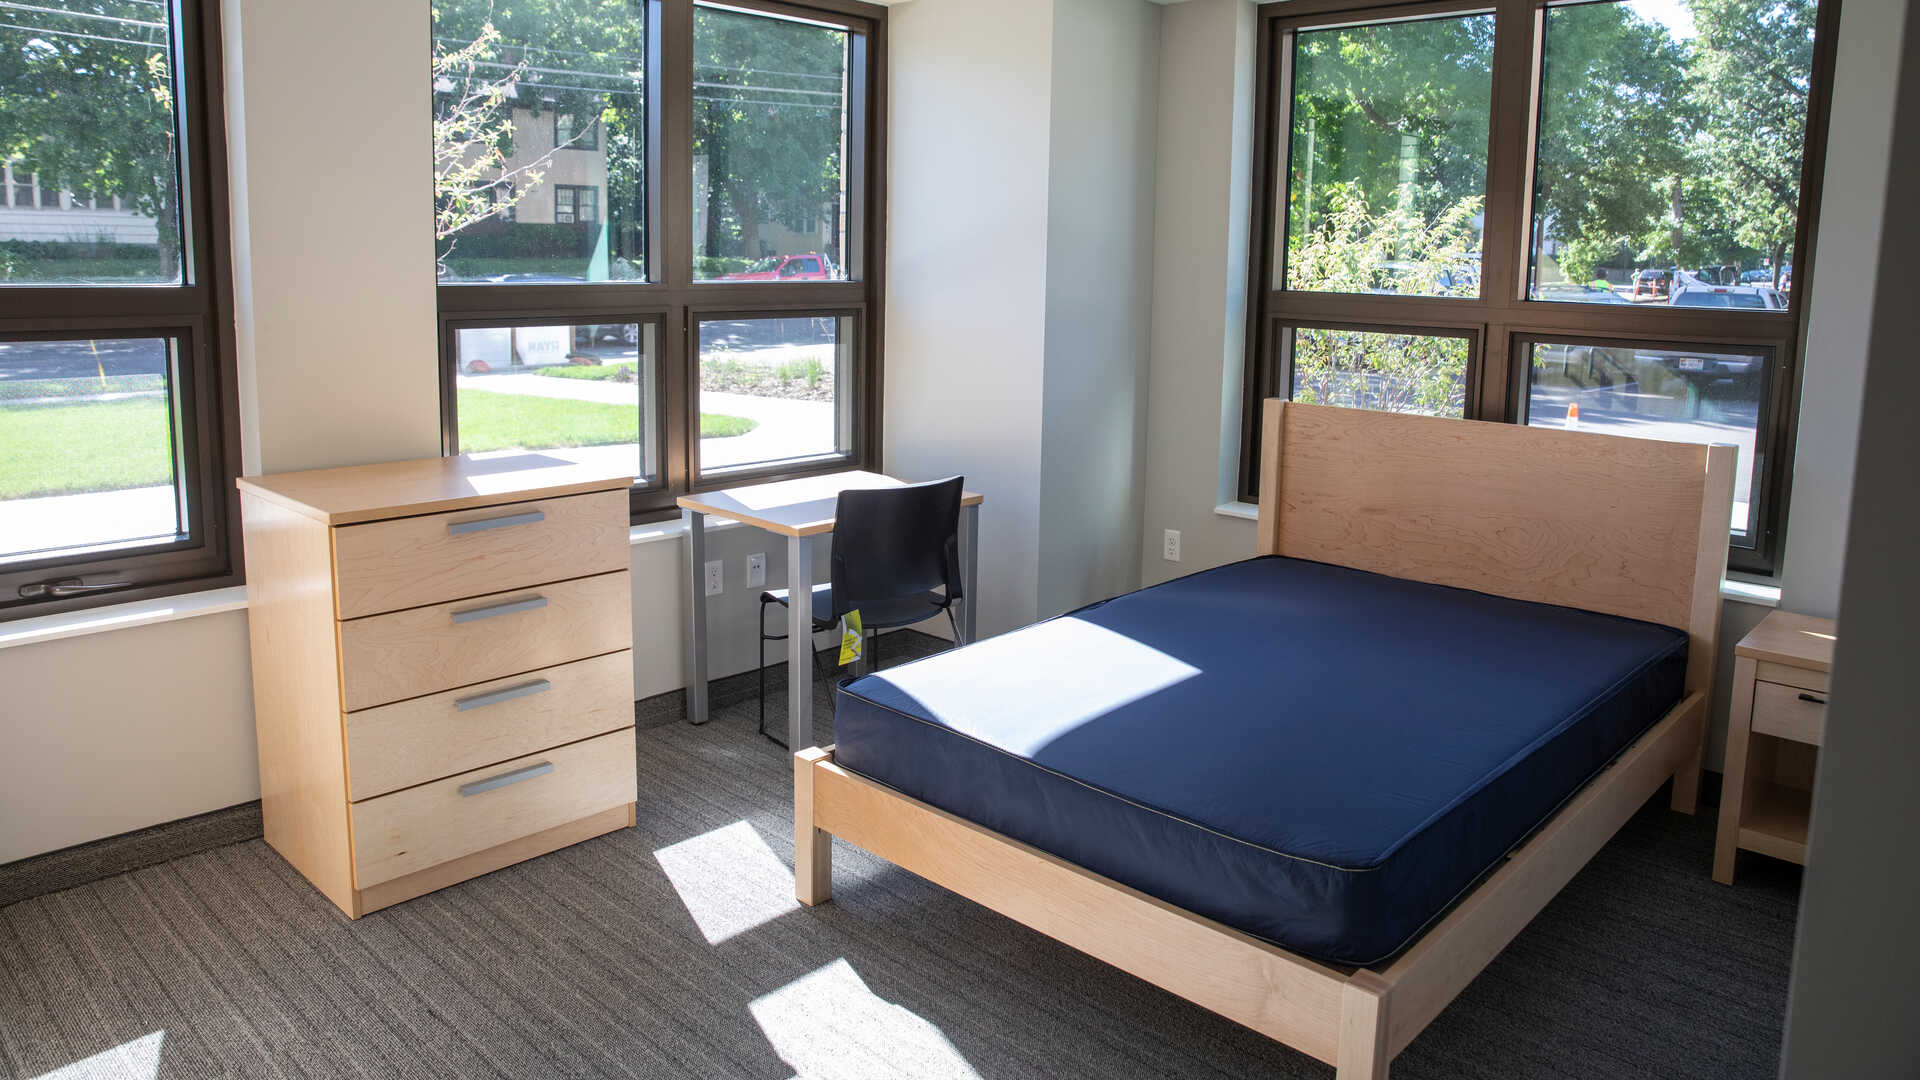 Dorm room with furniture